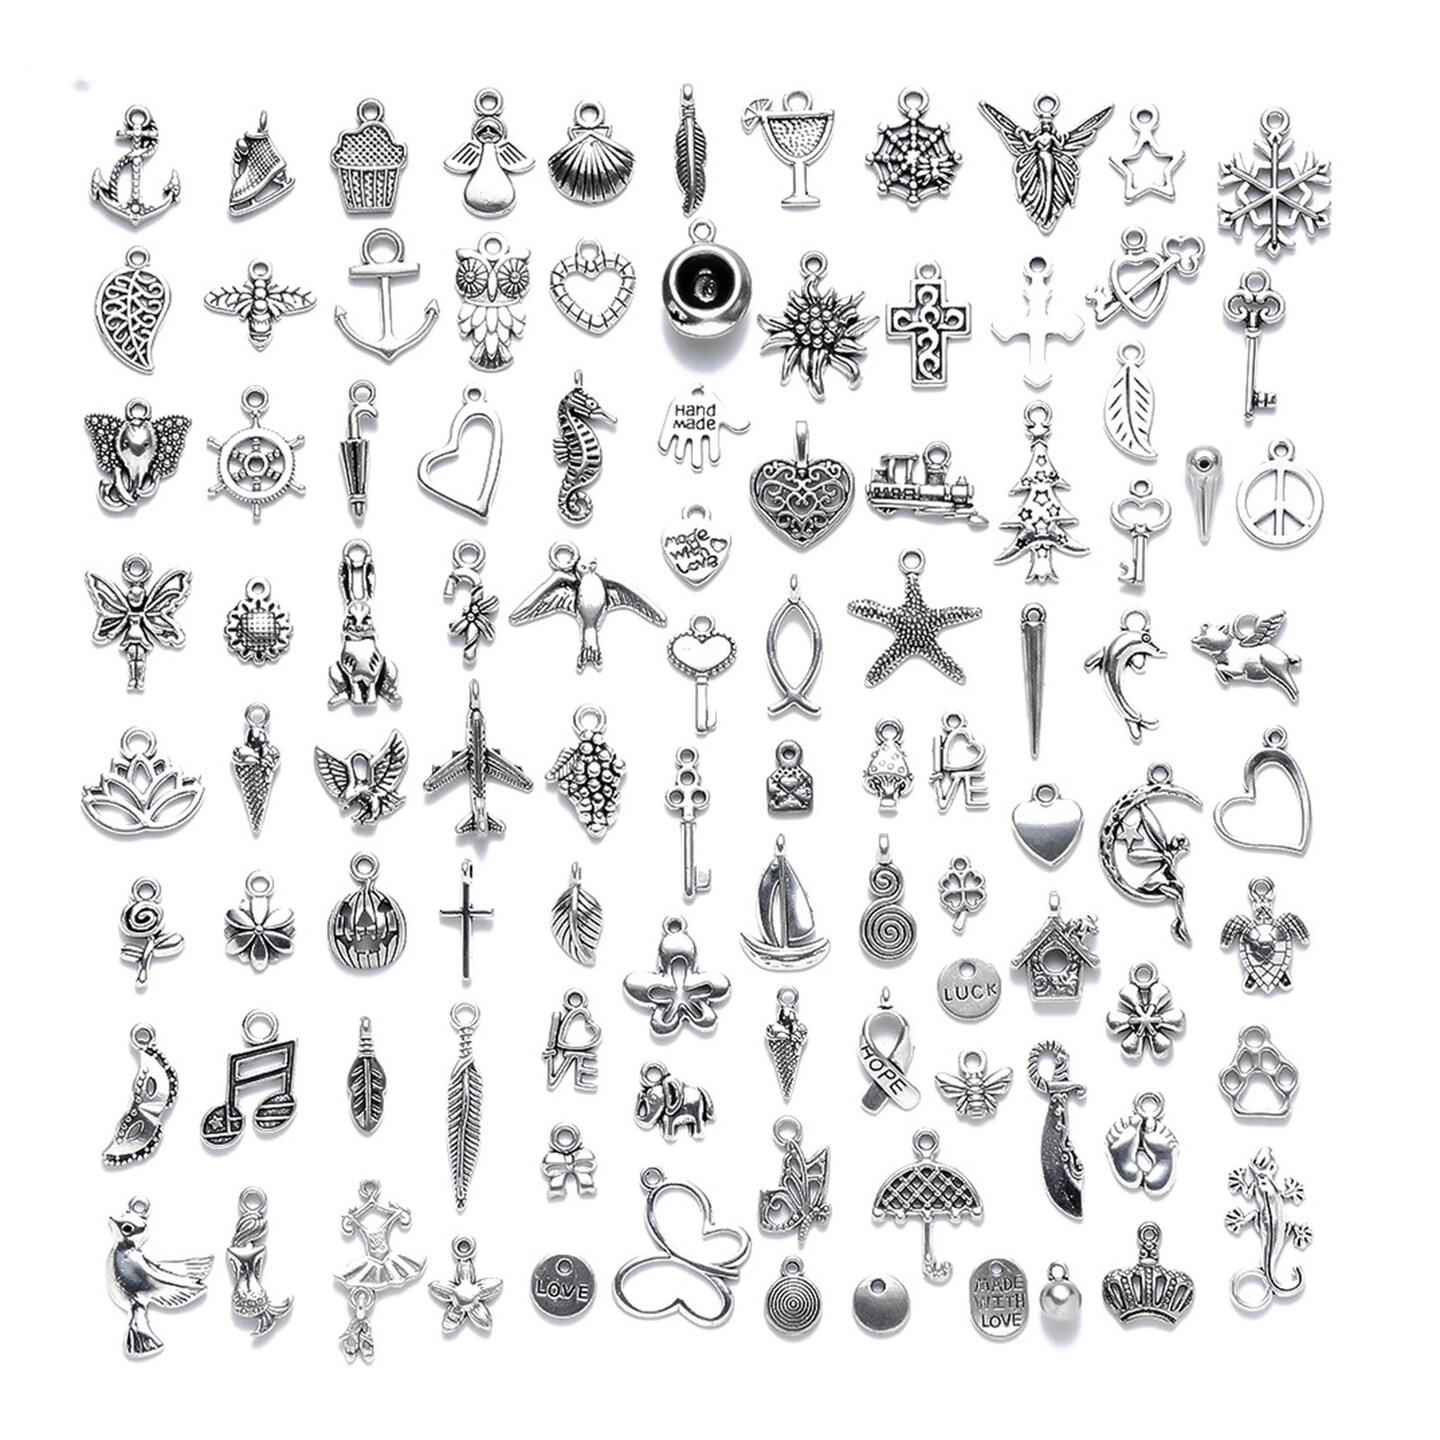 Generic 100Pcs Pendants DIY Beautiful Alloy Jewelry Making Accessories for Necklace